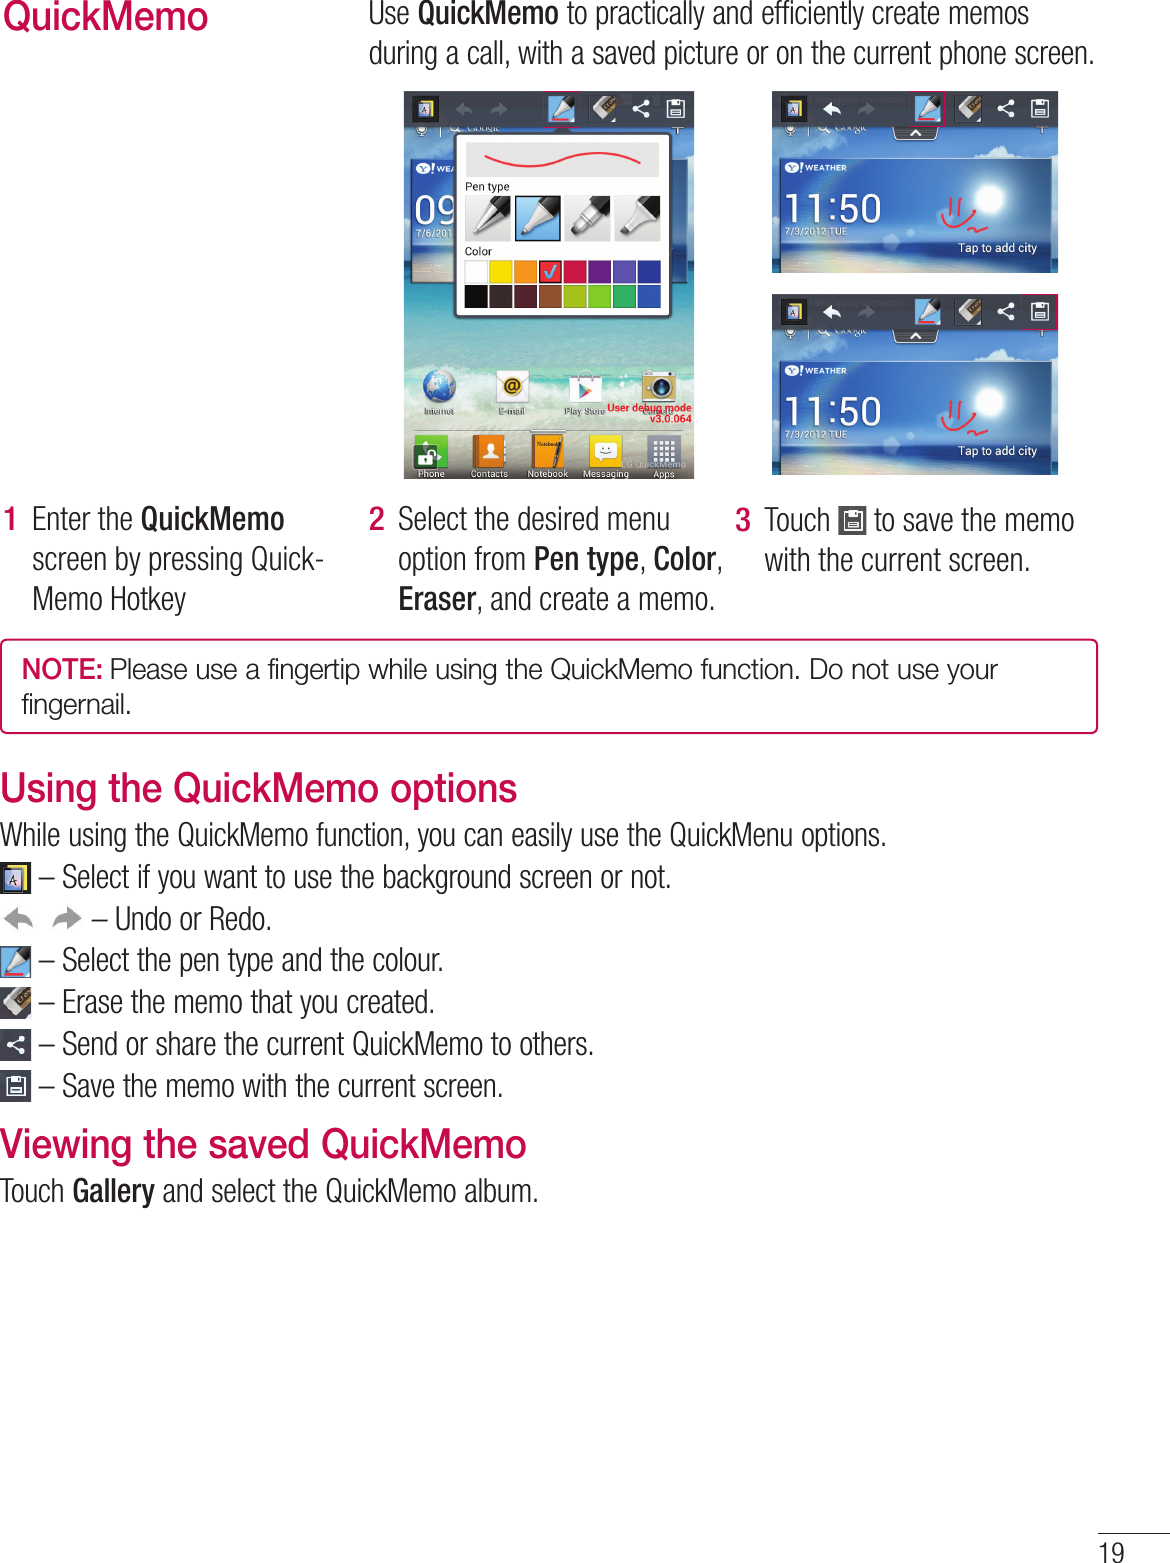 19QuickMemoUse QuickMemo to practically and efficiently create memos during a call, with a saved picture or on the current phone screen.Enter the QuickMemo screen by pressing Quick-Memo Hotkey 1 Select the desired menu option from Pen type, Color, Eraser, and create a memo.2 Touch   to save the memo with the current screen.3 NOTE: Please use a fingertip while using the QuickMemo function. Do not use your fingernail.Using the QuickMemo optionsWhile using the QuickMemo function, you can easily use the QuickMenu options. –  Select if you want to use the background screen or not. – Undo or Redo. – Select the pen type and the colour. –  Erase the memo that you created. –  Send or share the current QuickMemo to others. –  Save the memo with the current screen.Viewing the saved QuickMemo Touch Gallery and select the QuickMemo album.